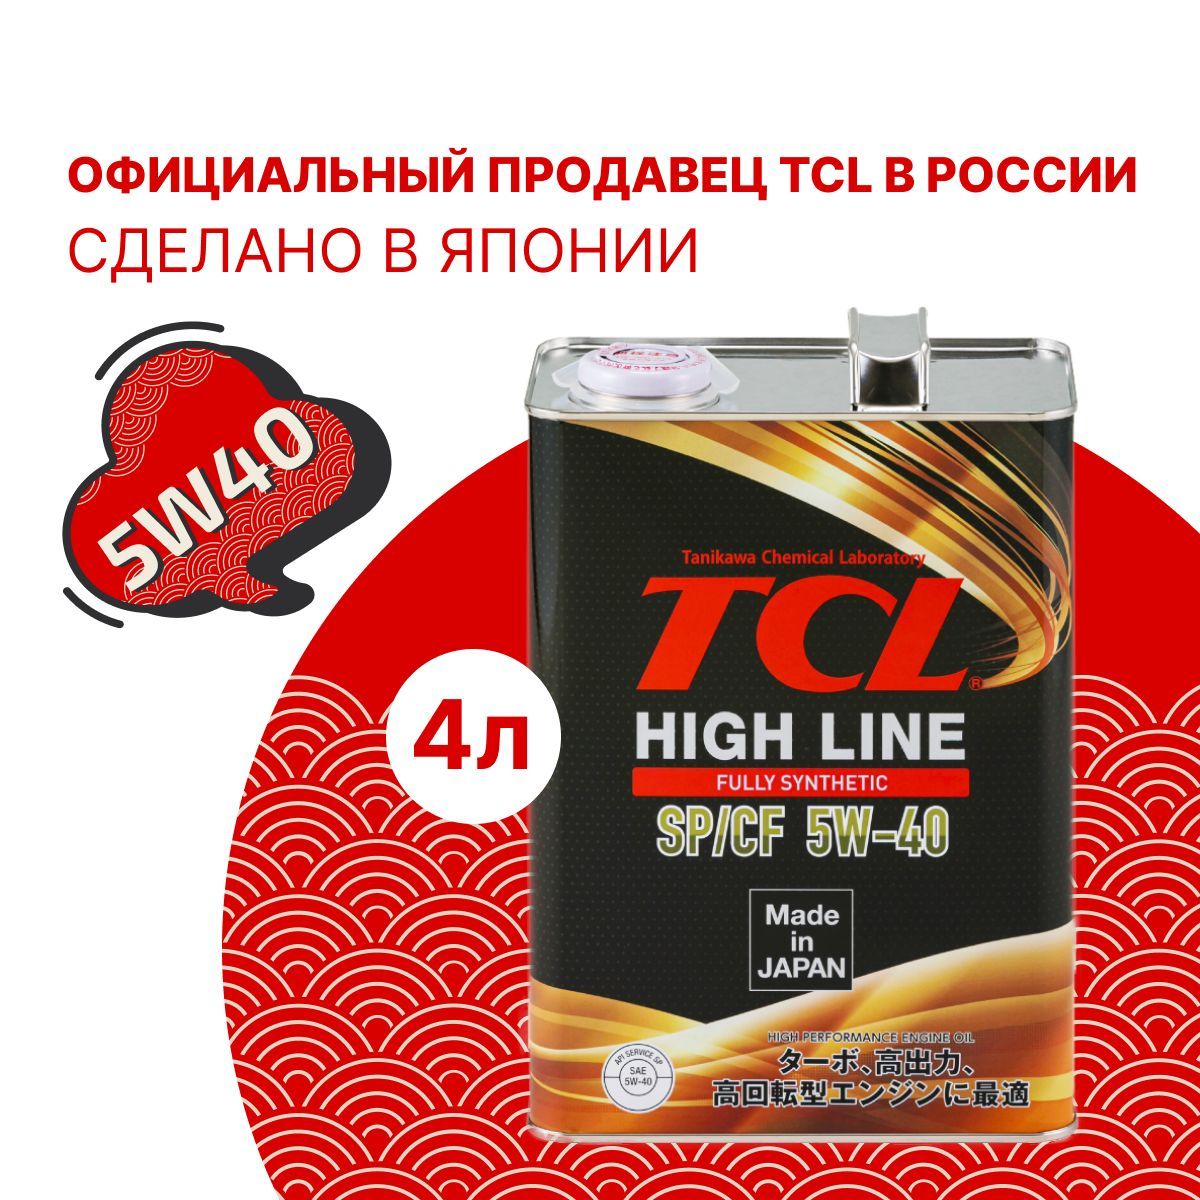 Масло tcl 5w40. Моторное масло ТСЛ. TCL масло. Характеристика масла TCL. TCL масло в коробку.